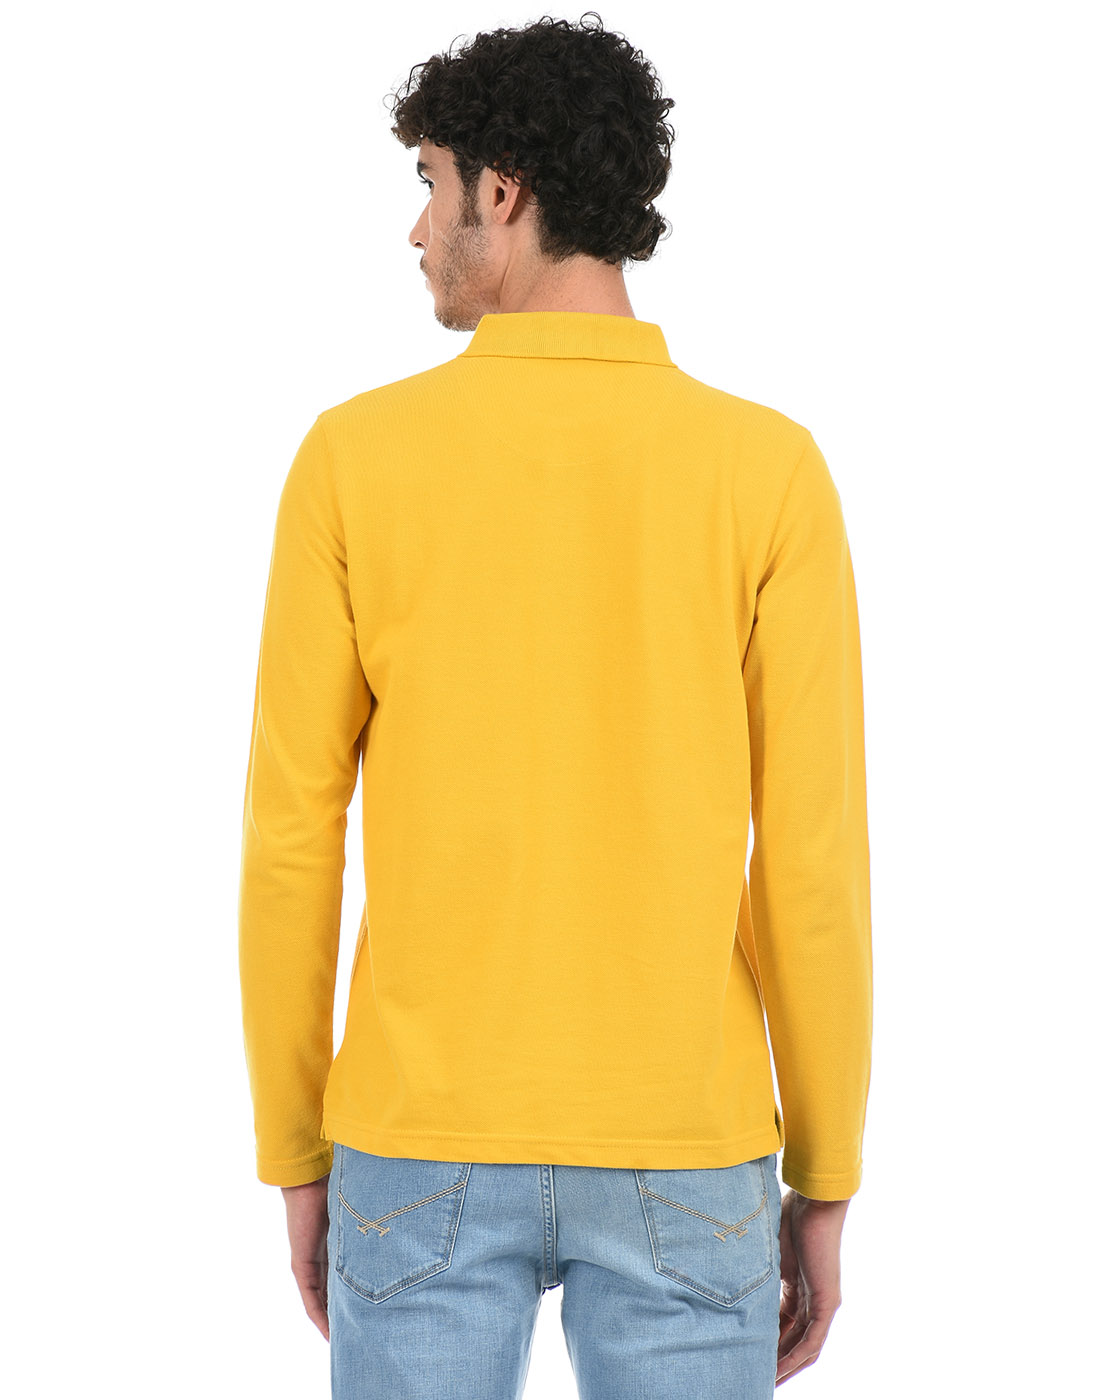 Oneway Men Solid Yellow Polo T-Shirt